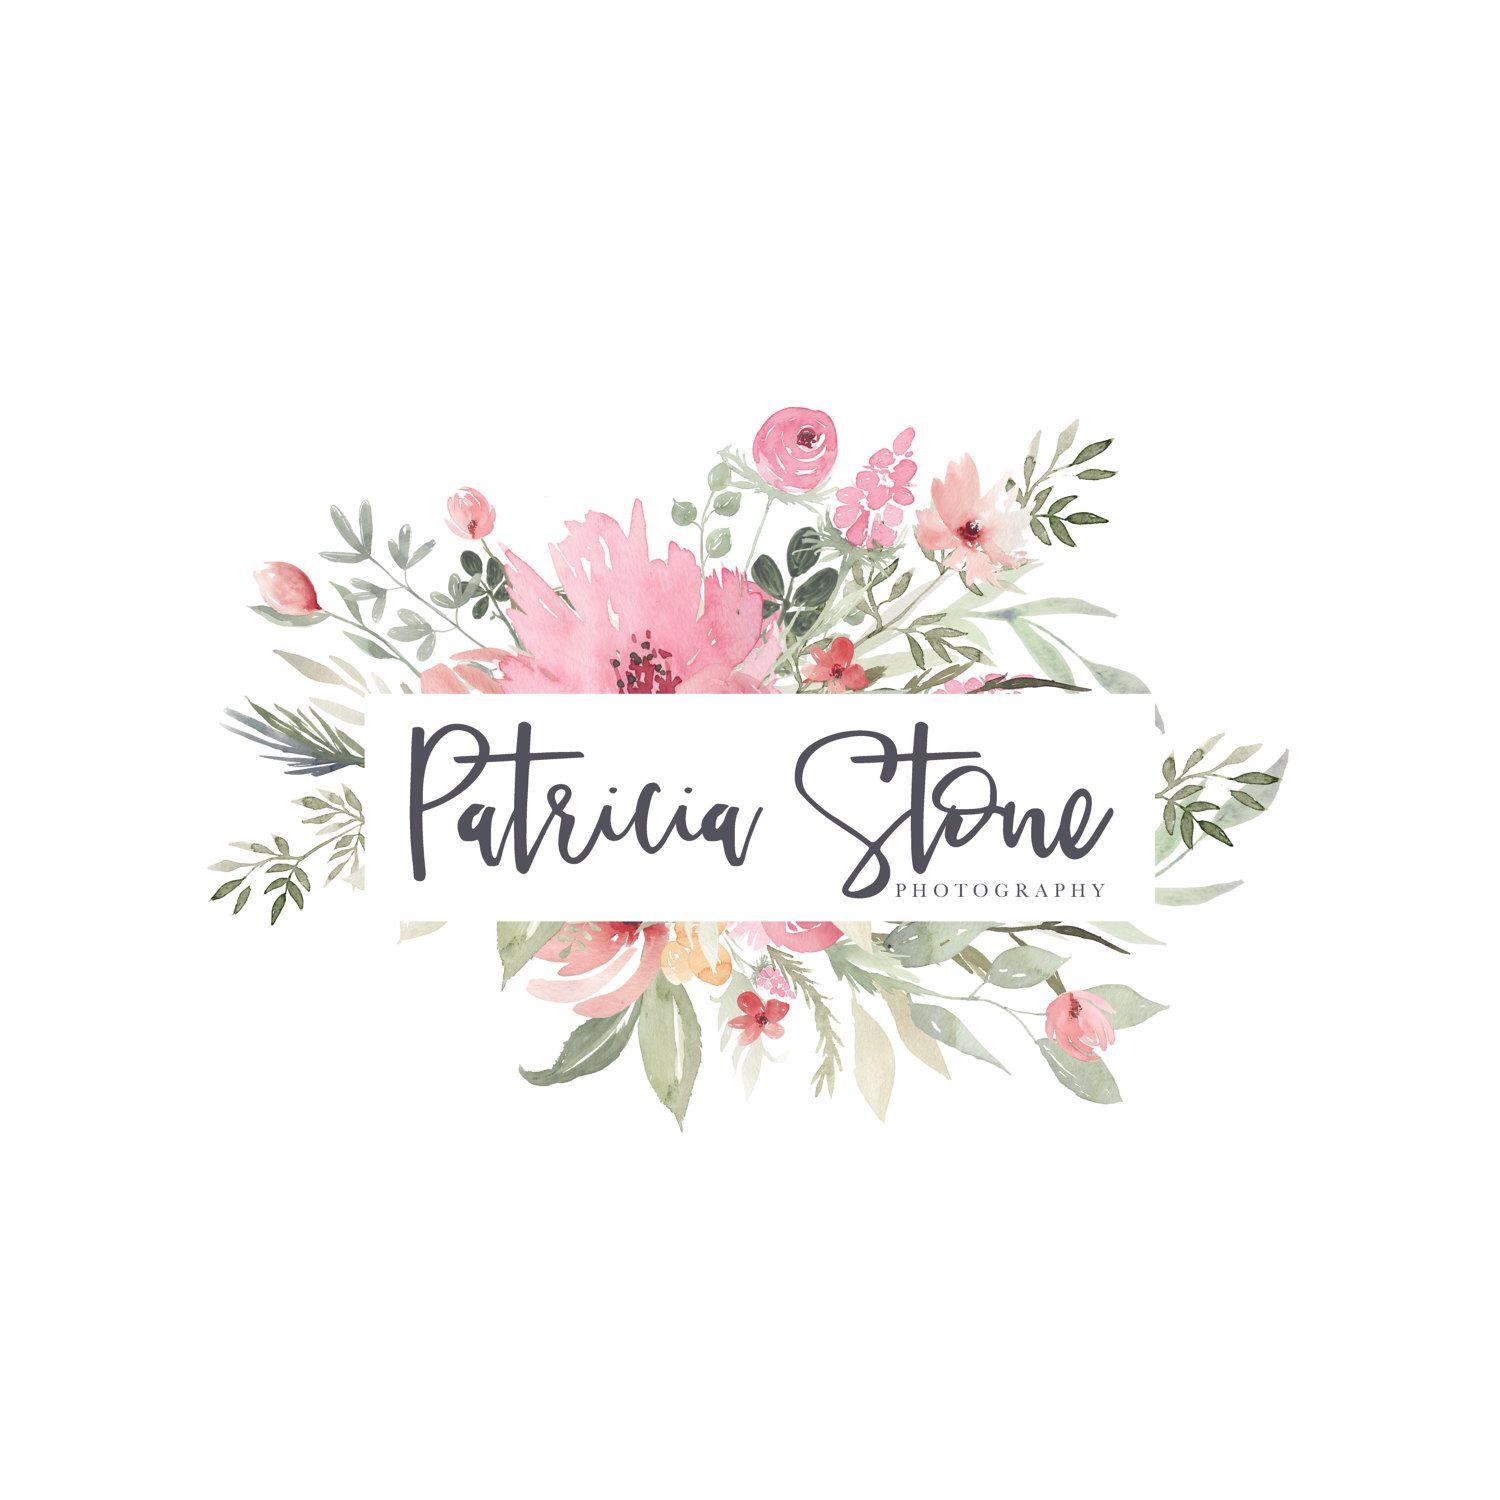 Flower Logo - Watercolor Flower Logo - Premade Photography Logo and Watermark ...